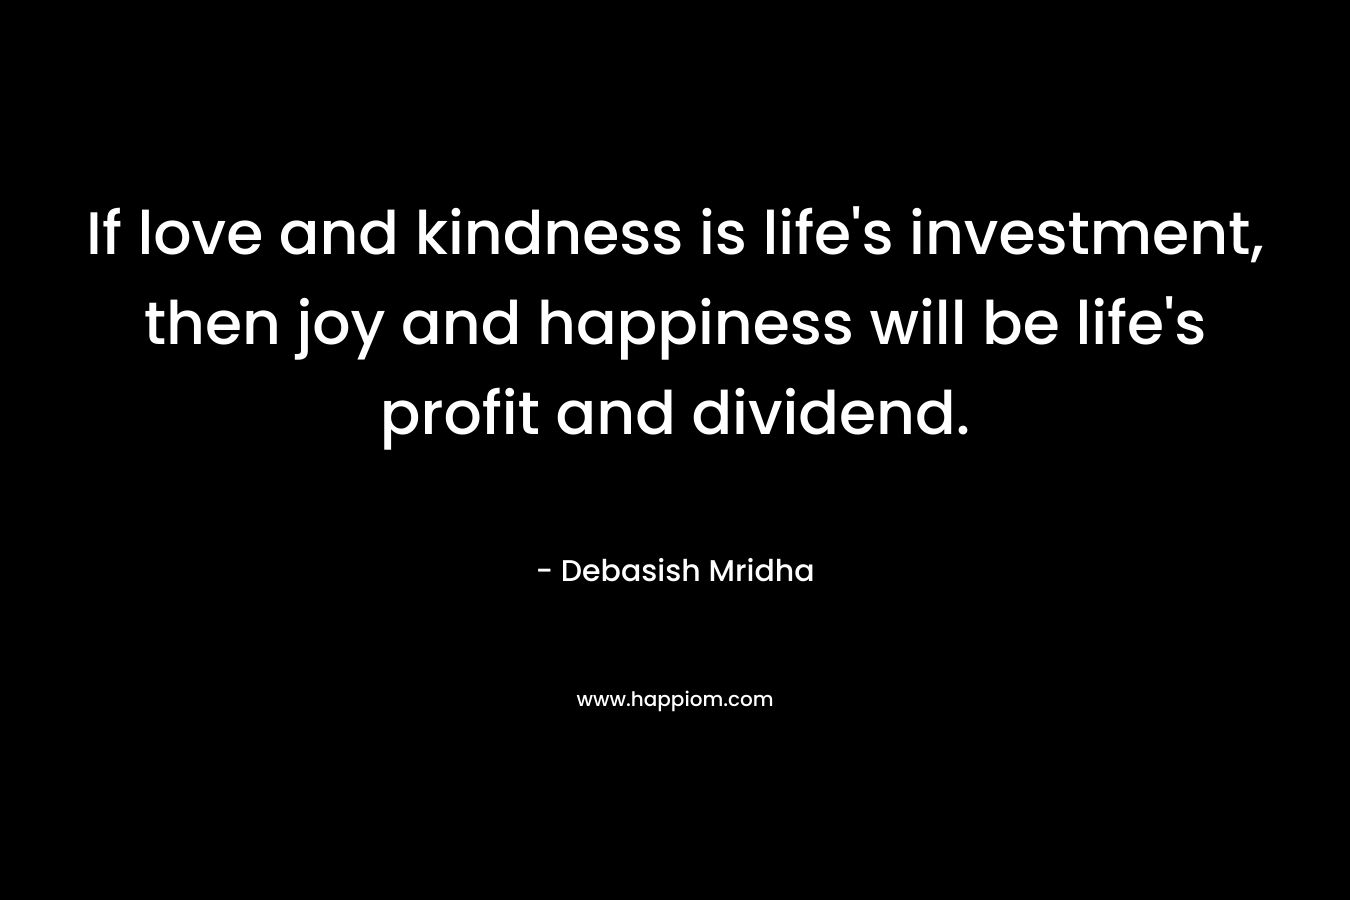 If love and kindness is life's investment, then joy and happiness will be life's profit and dividend.